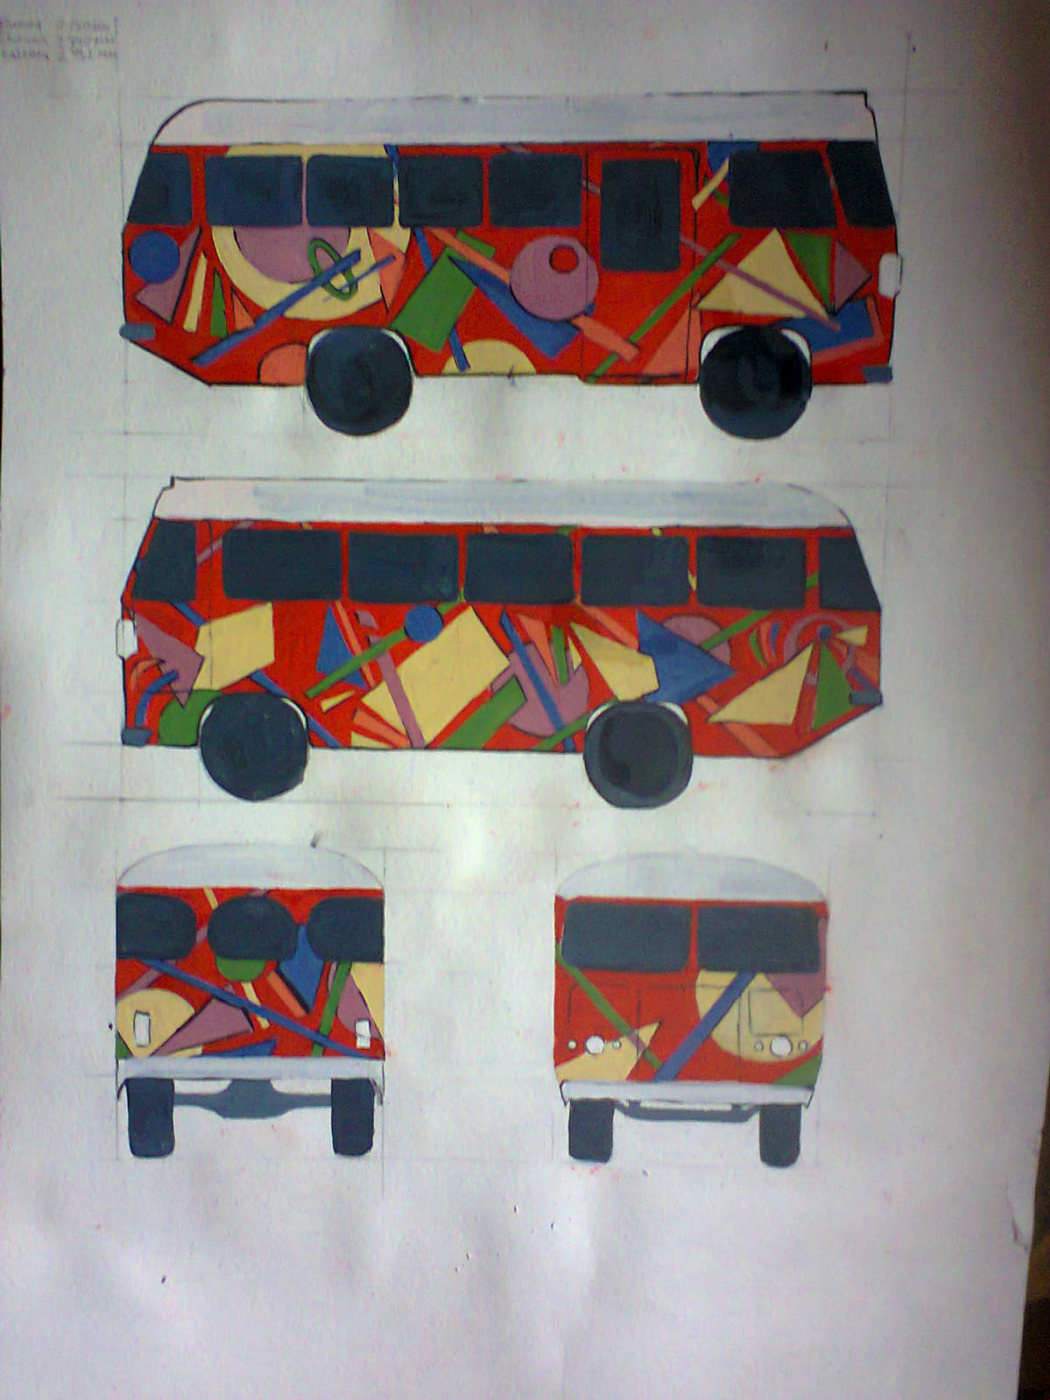 Bus painting